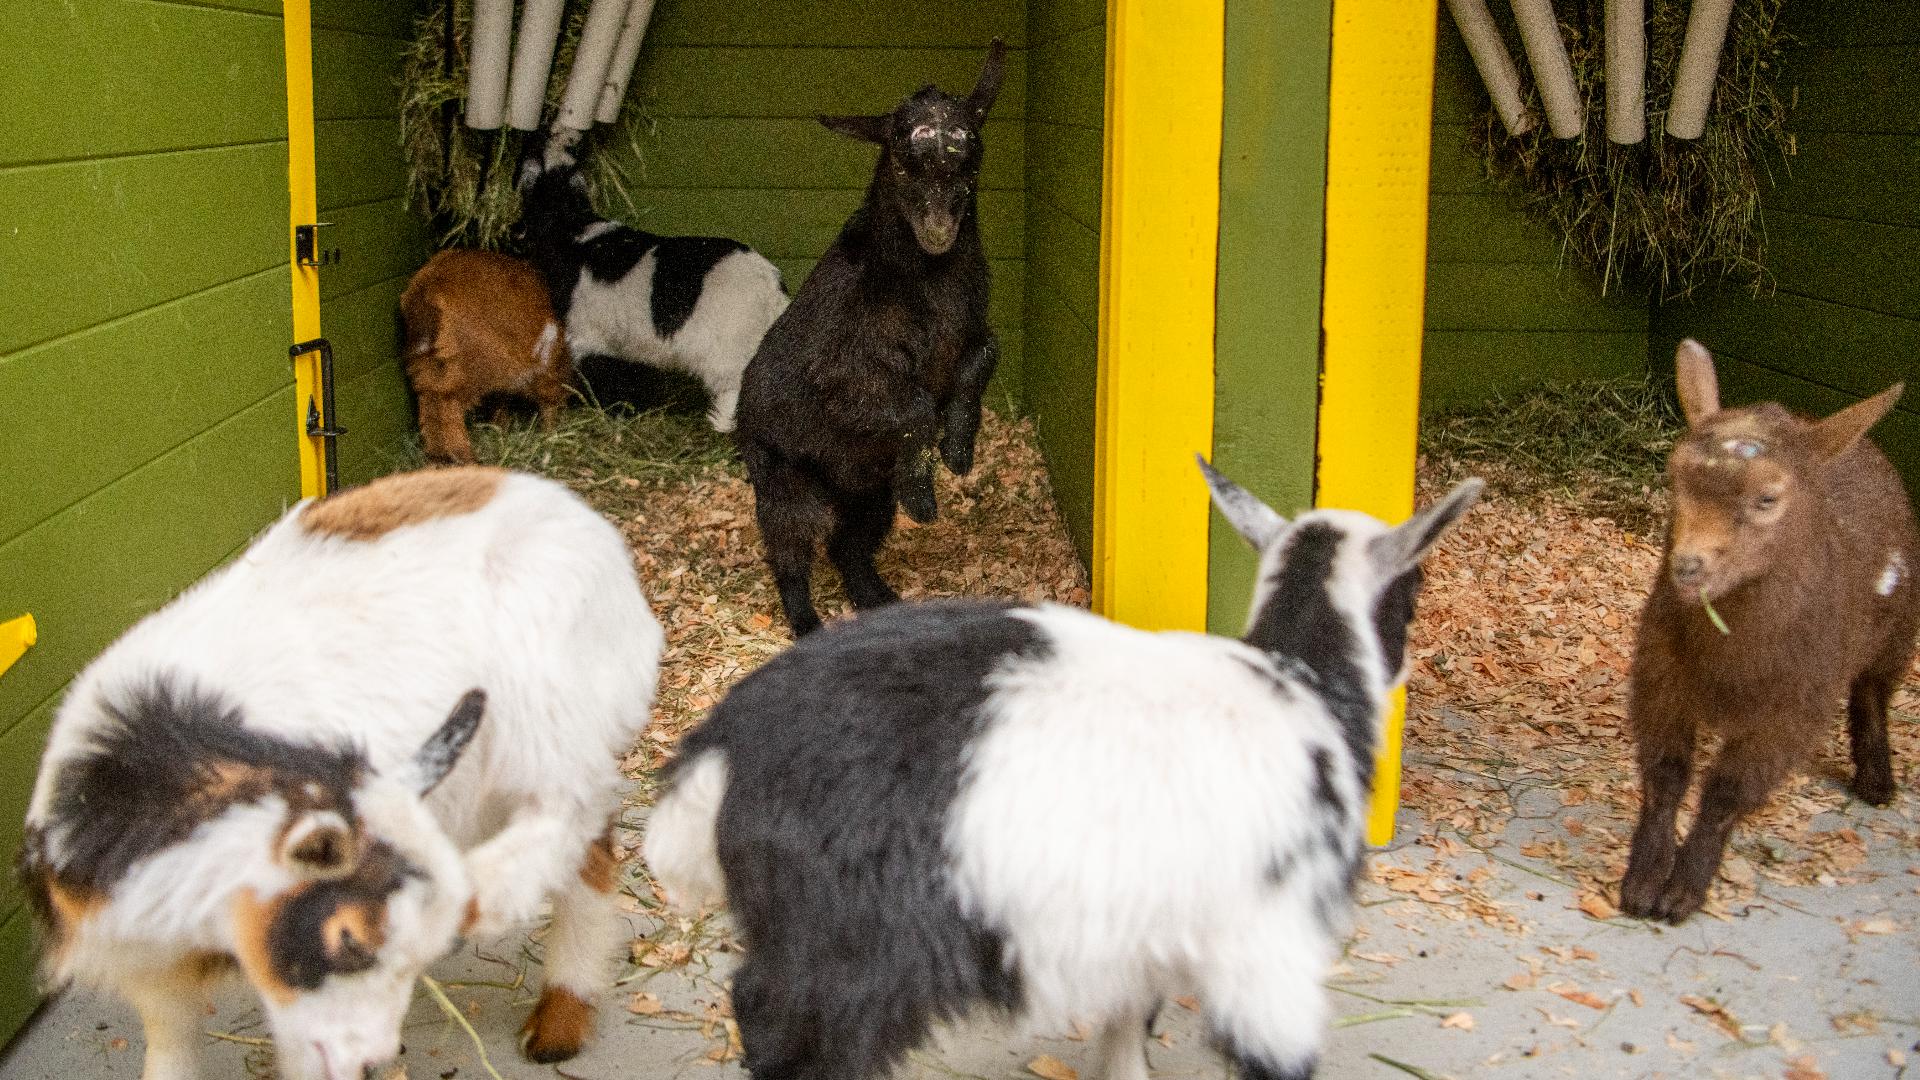 The goat kids are named Kettle, Biscuit, Hopper, Crumpet, Daisy Mae, Rhubarb, and Thistle.